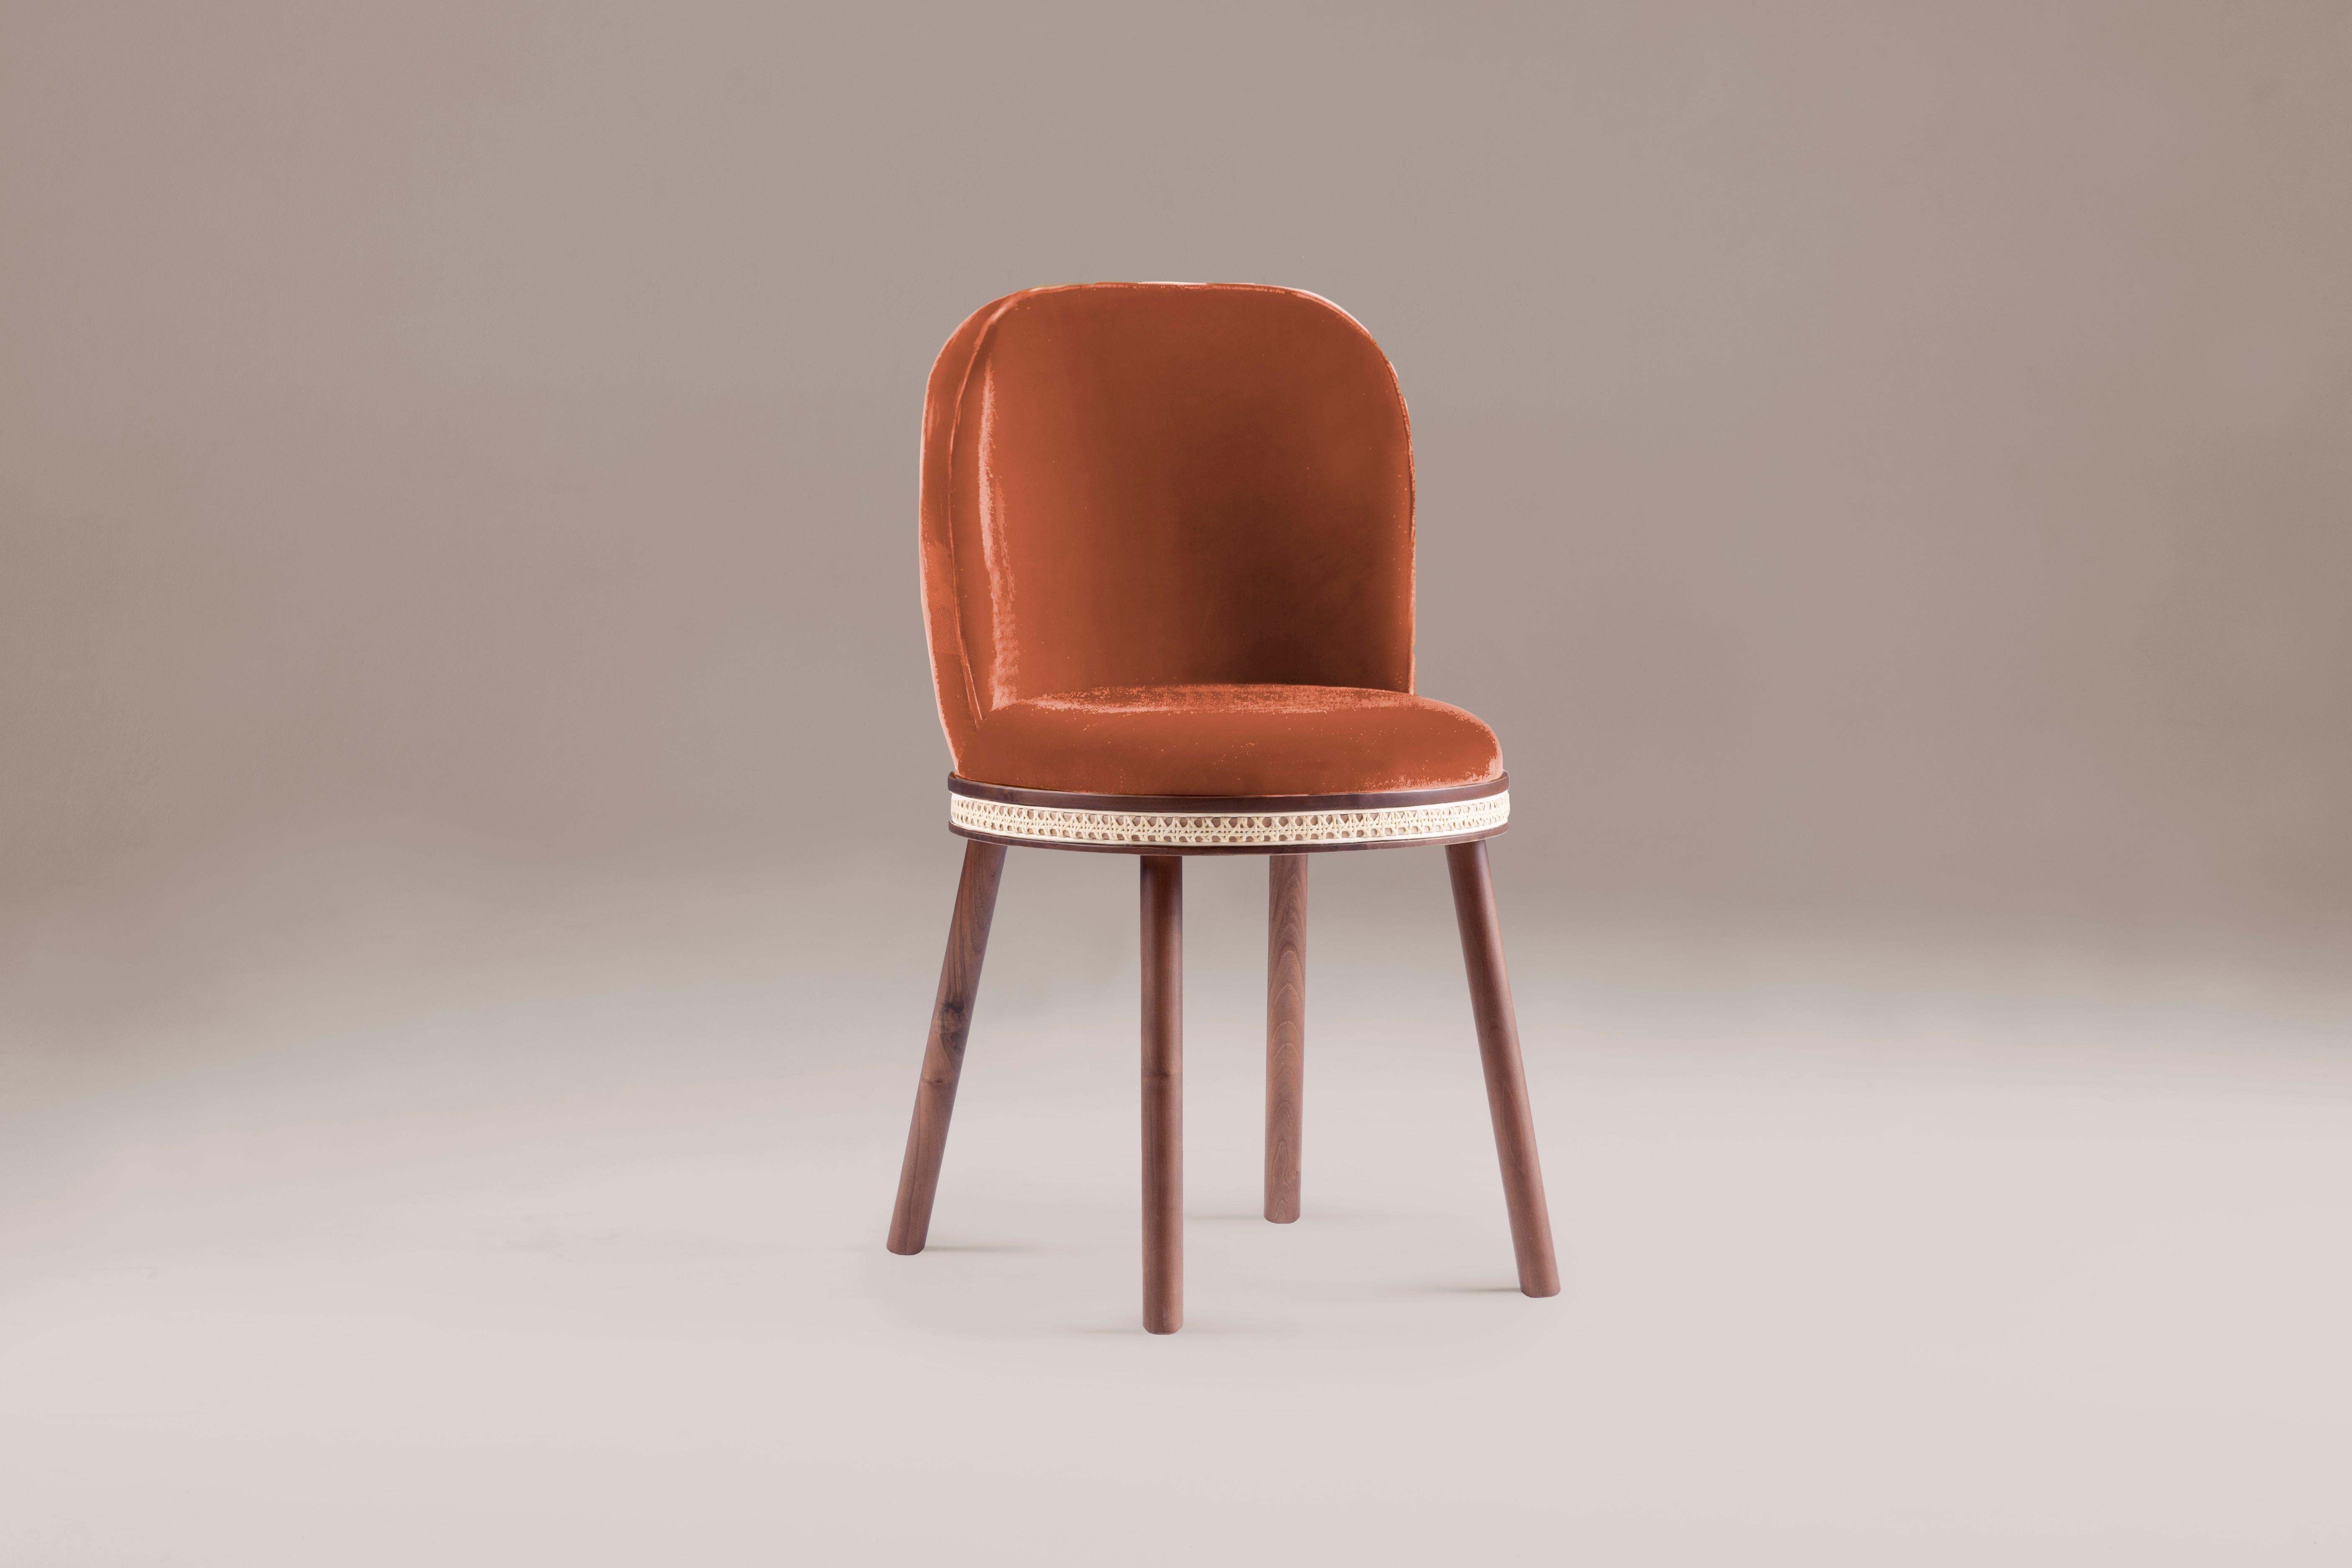 DOOQ Mid-Century Modern Dinning Chair Alma Terracotta Velvet, Walnut Wood Legs

In a piece that combines classic and modern aesthetics we can find a certain harmonic gracefulness paired with an intimate voluptuousness that can embrace you and